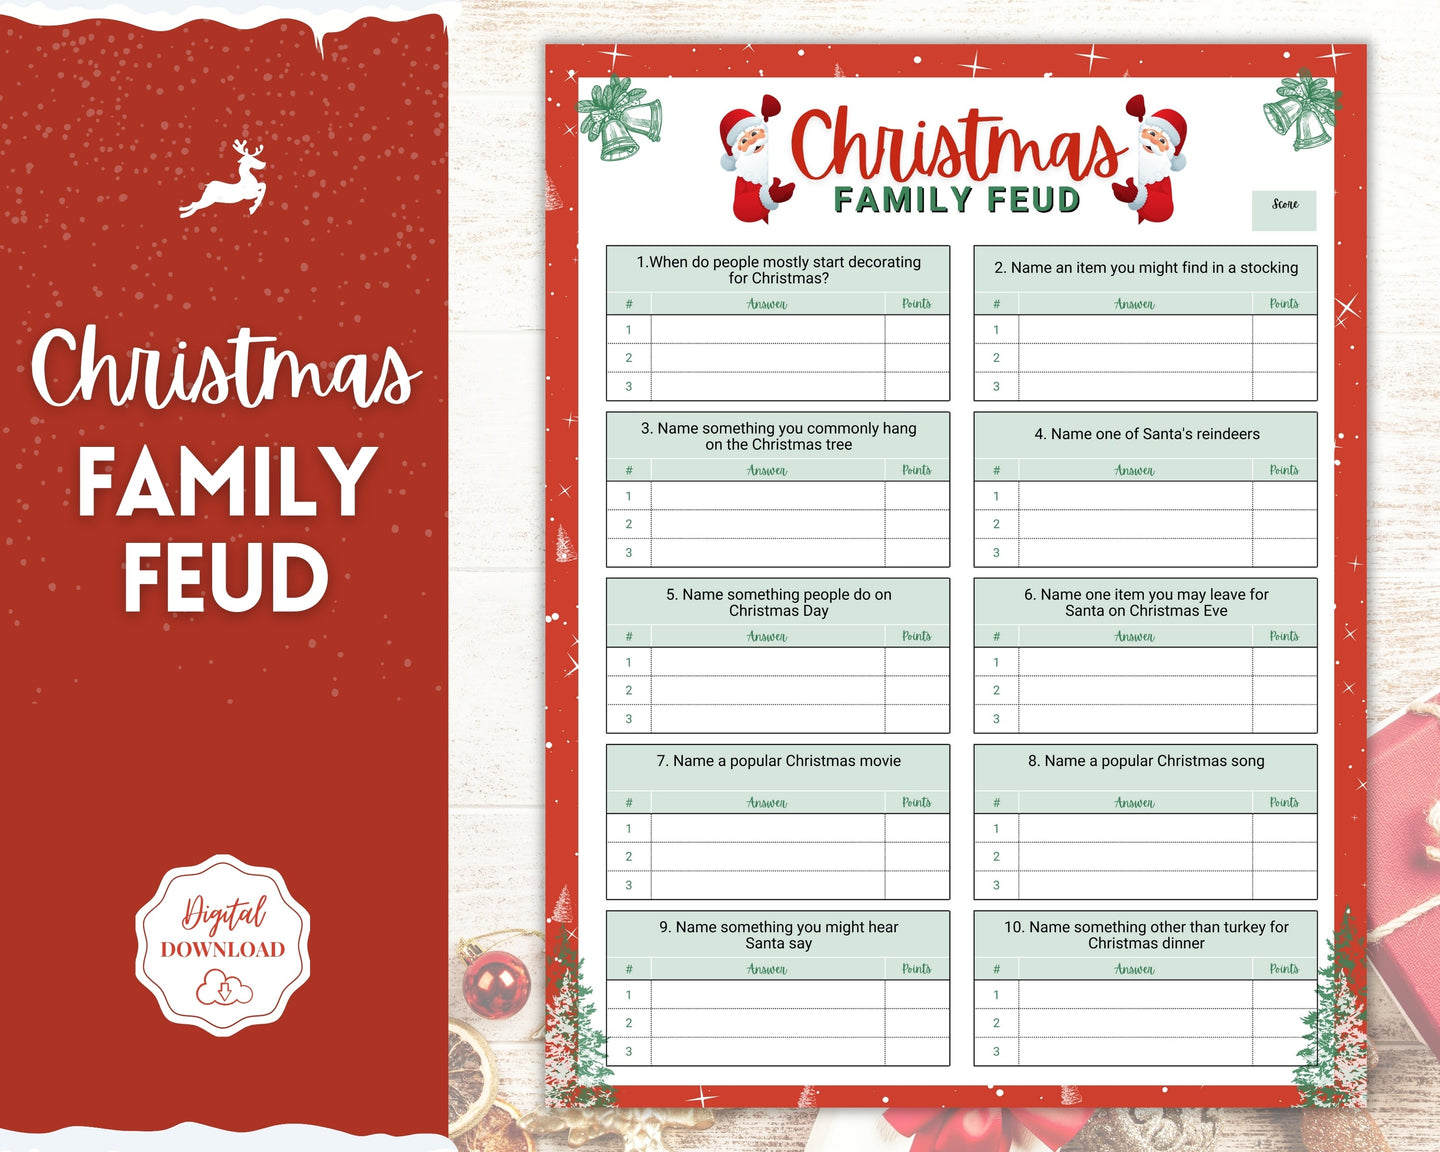 Christmas Family Feud Game! Holiday Family Quiz Game, Printable Xmas Party Game, Virtual Fun Activity, Kids Adults, Office, Fortunes, Trivia